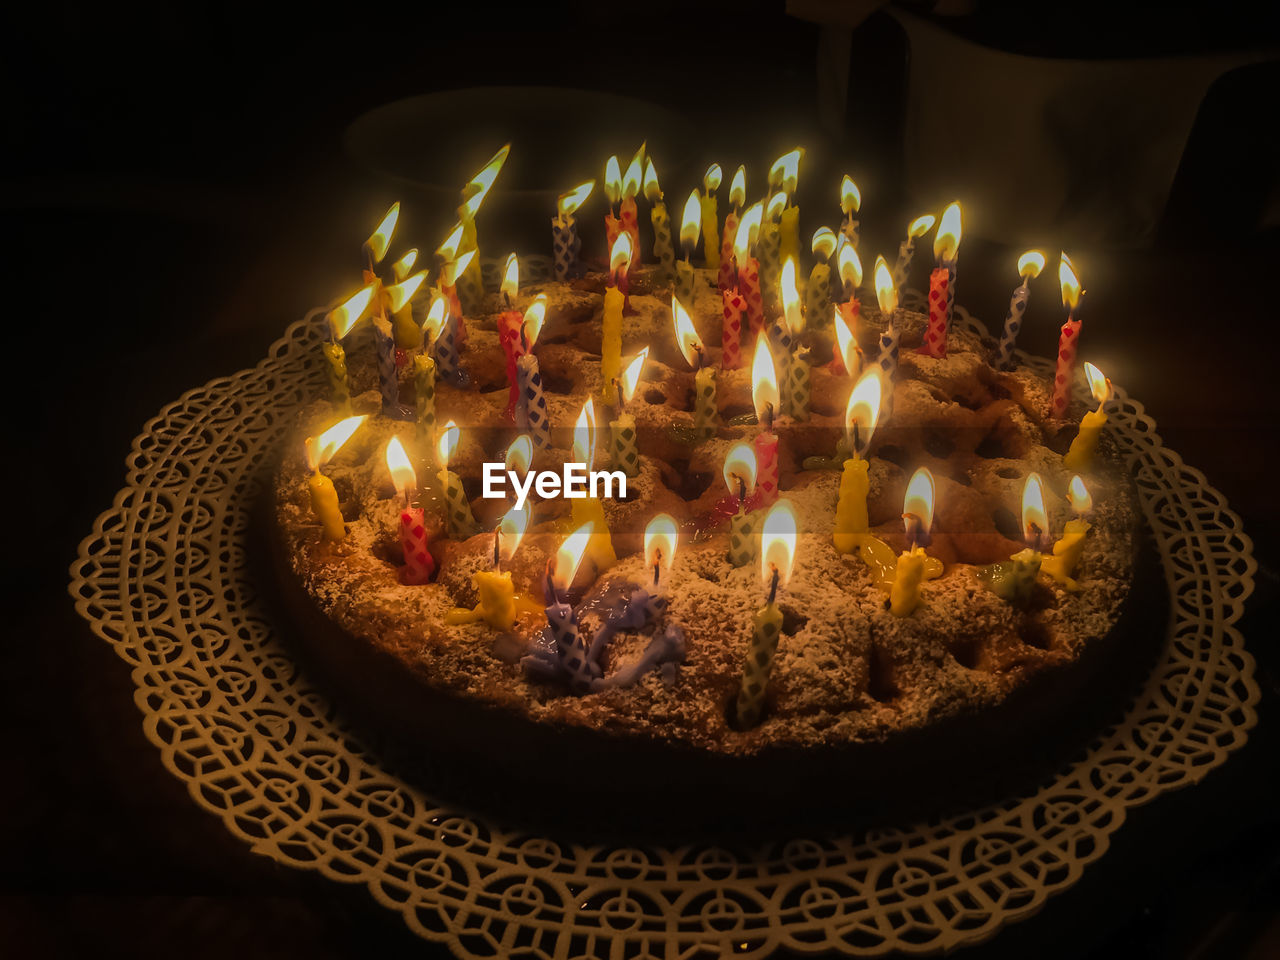 HIGH ANGLE VIEW OF CAKE WITH ILLUMINATED CANDLES ON TABLE